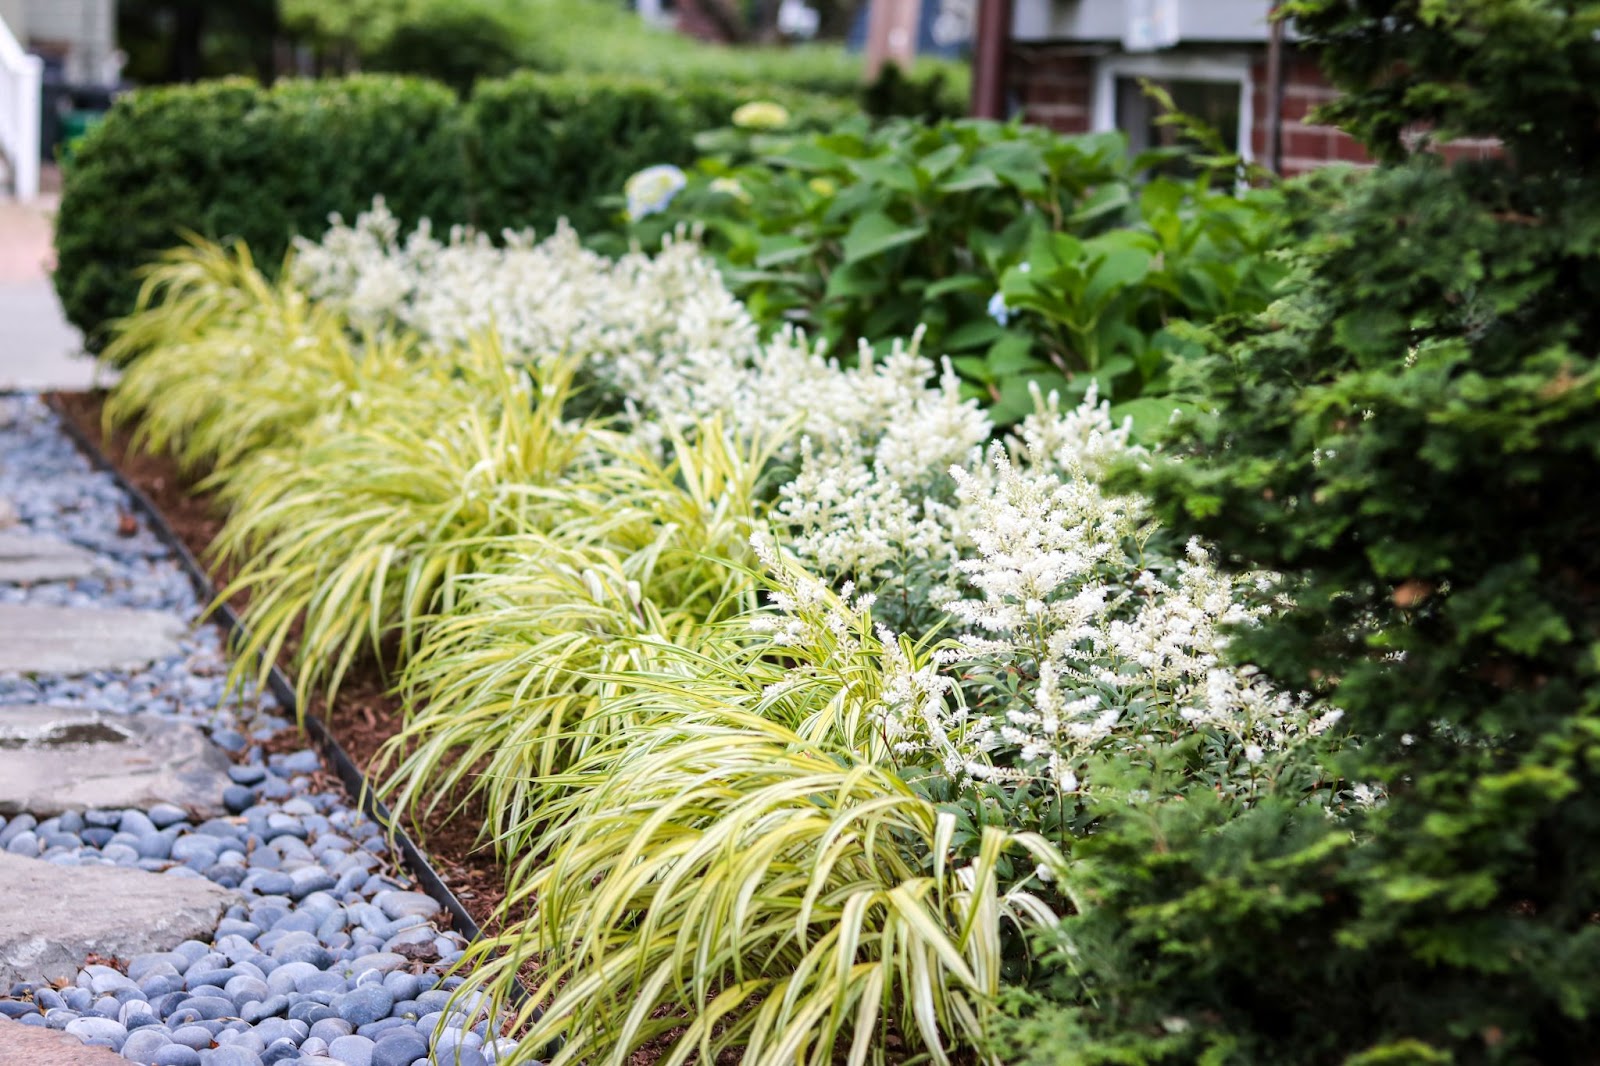 A landscape design features layered plantings in a small outdoor space